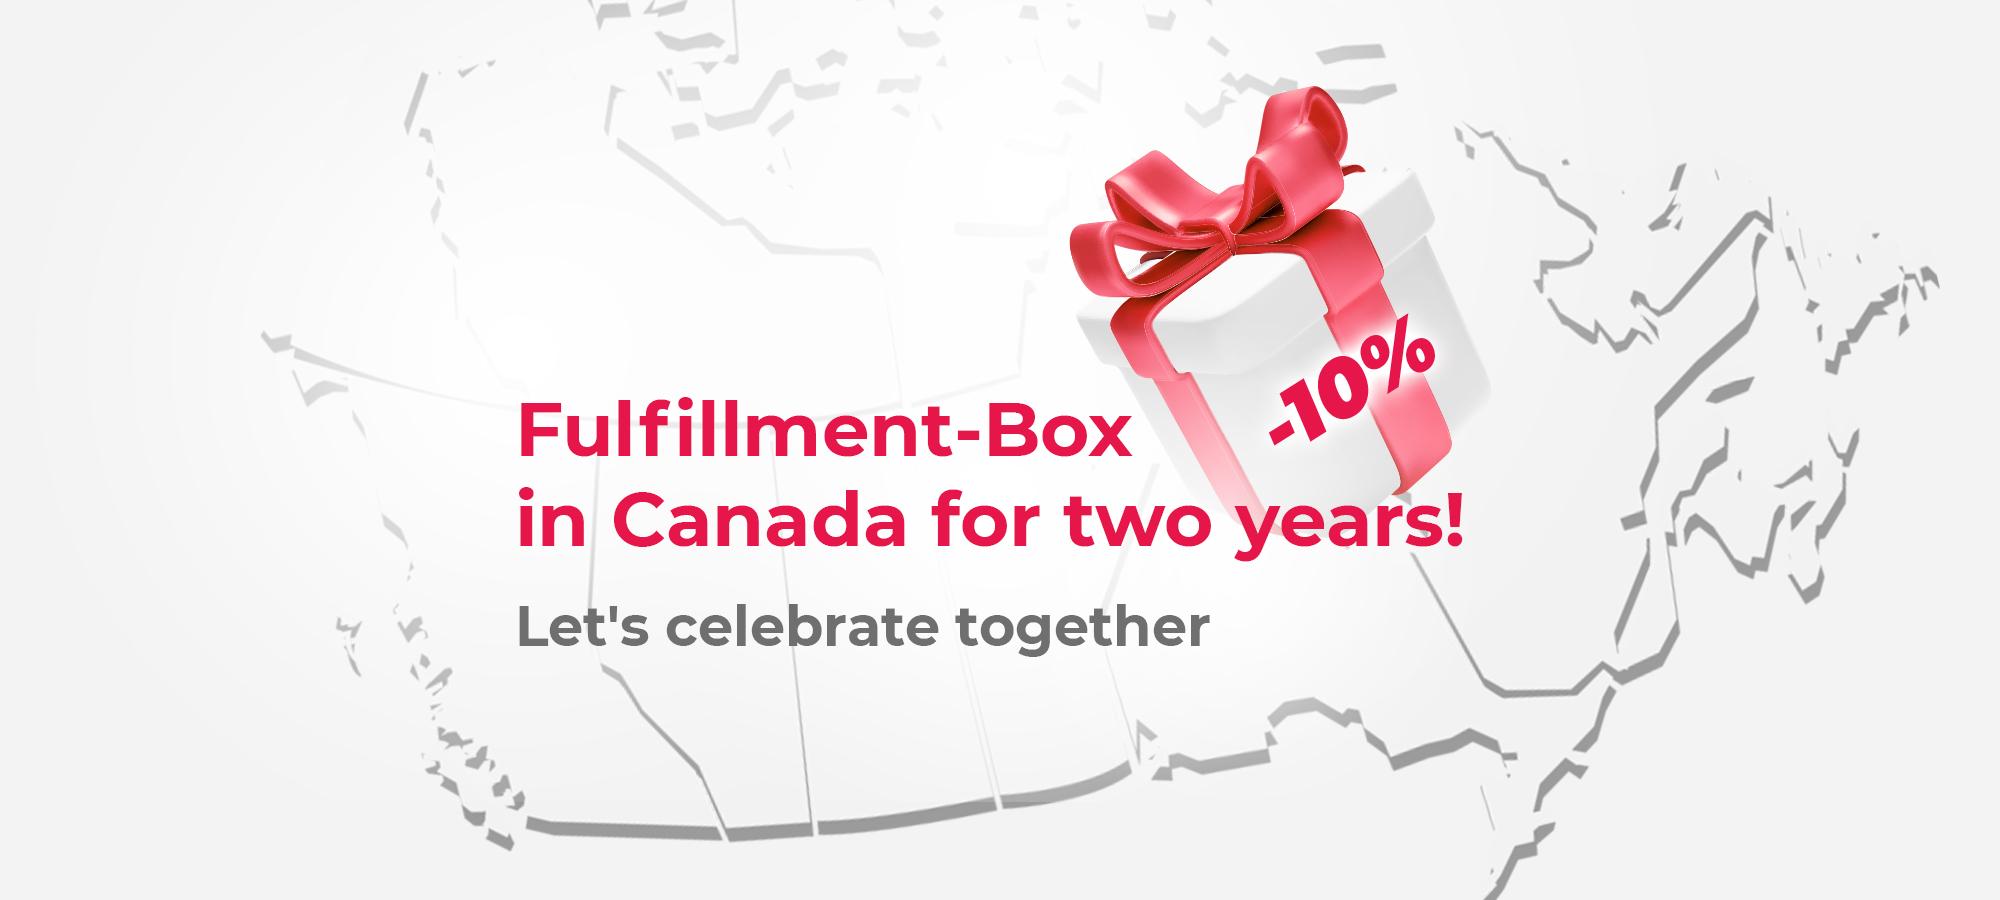 Fulfillment-Box in Canada is celebrating two years in business. 10% discount for new customers